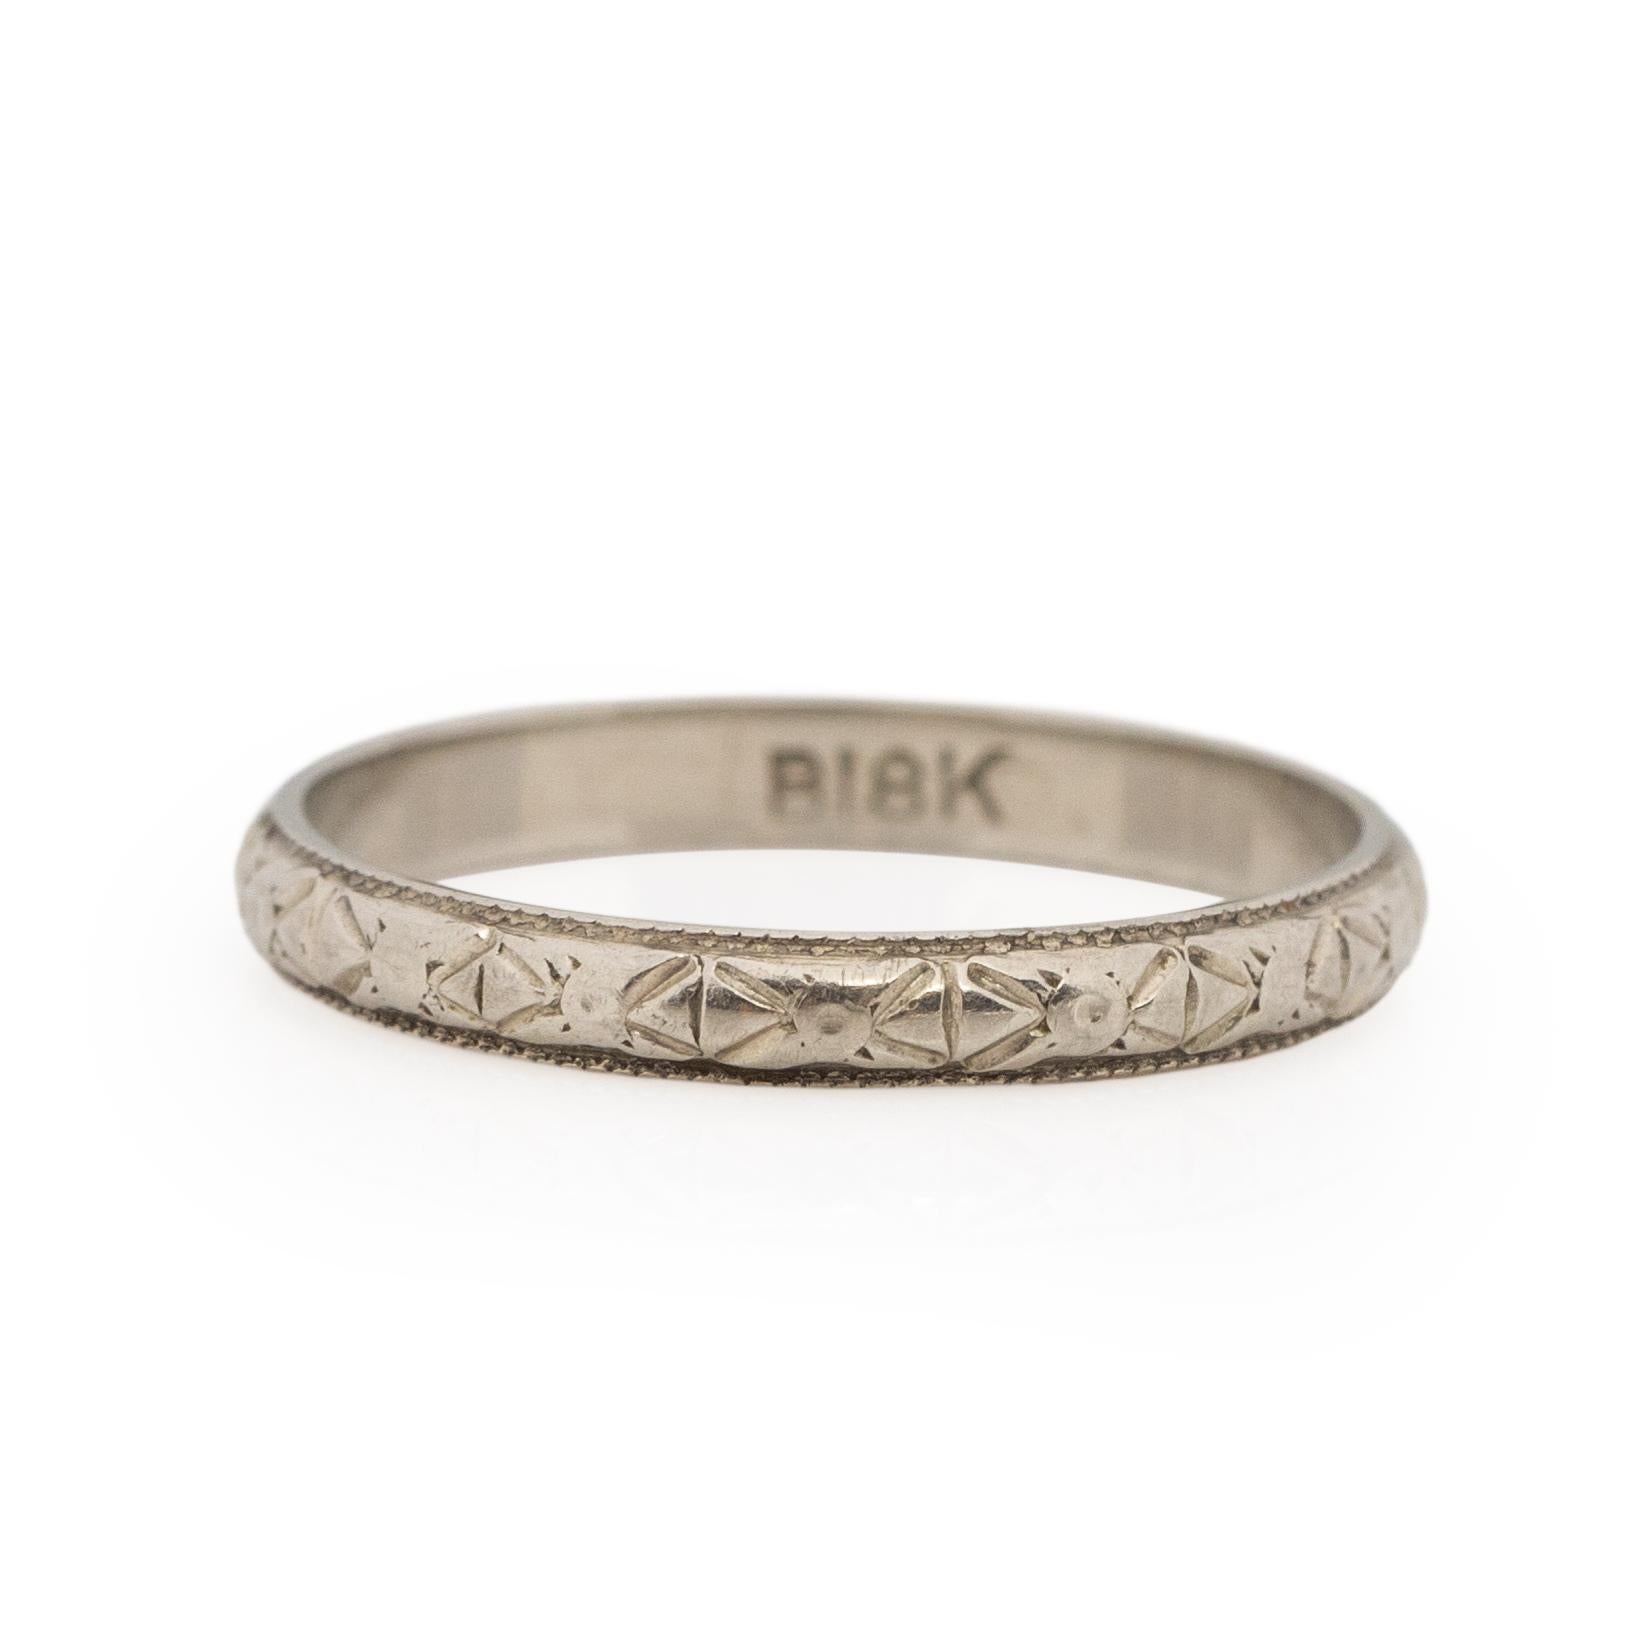 Here we have a petite, minimalist classic art deco hand carved band. This little baby is crafted in 18K white gold, in the center of a band is a beautifully carved repeating floral design, these types of designs were every popular in the 1920's.